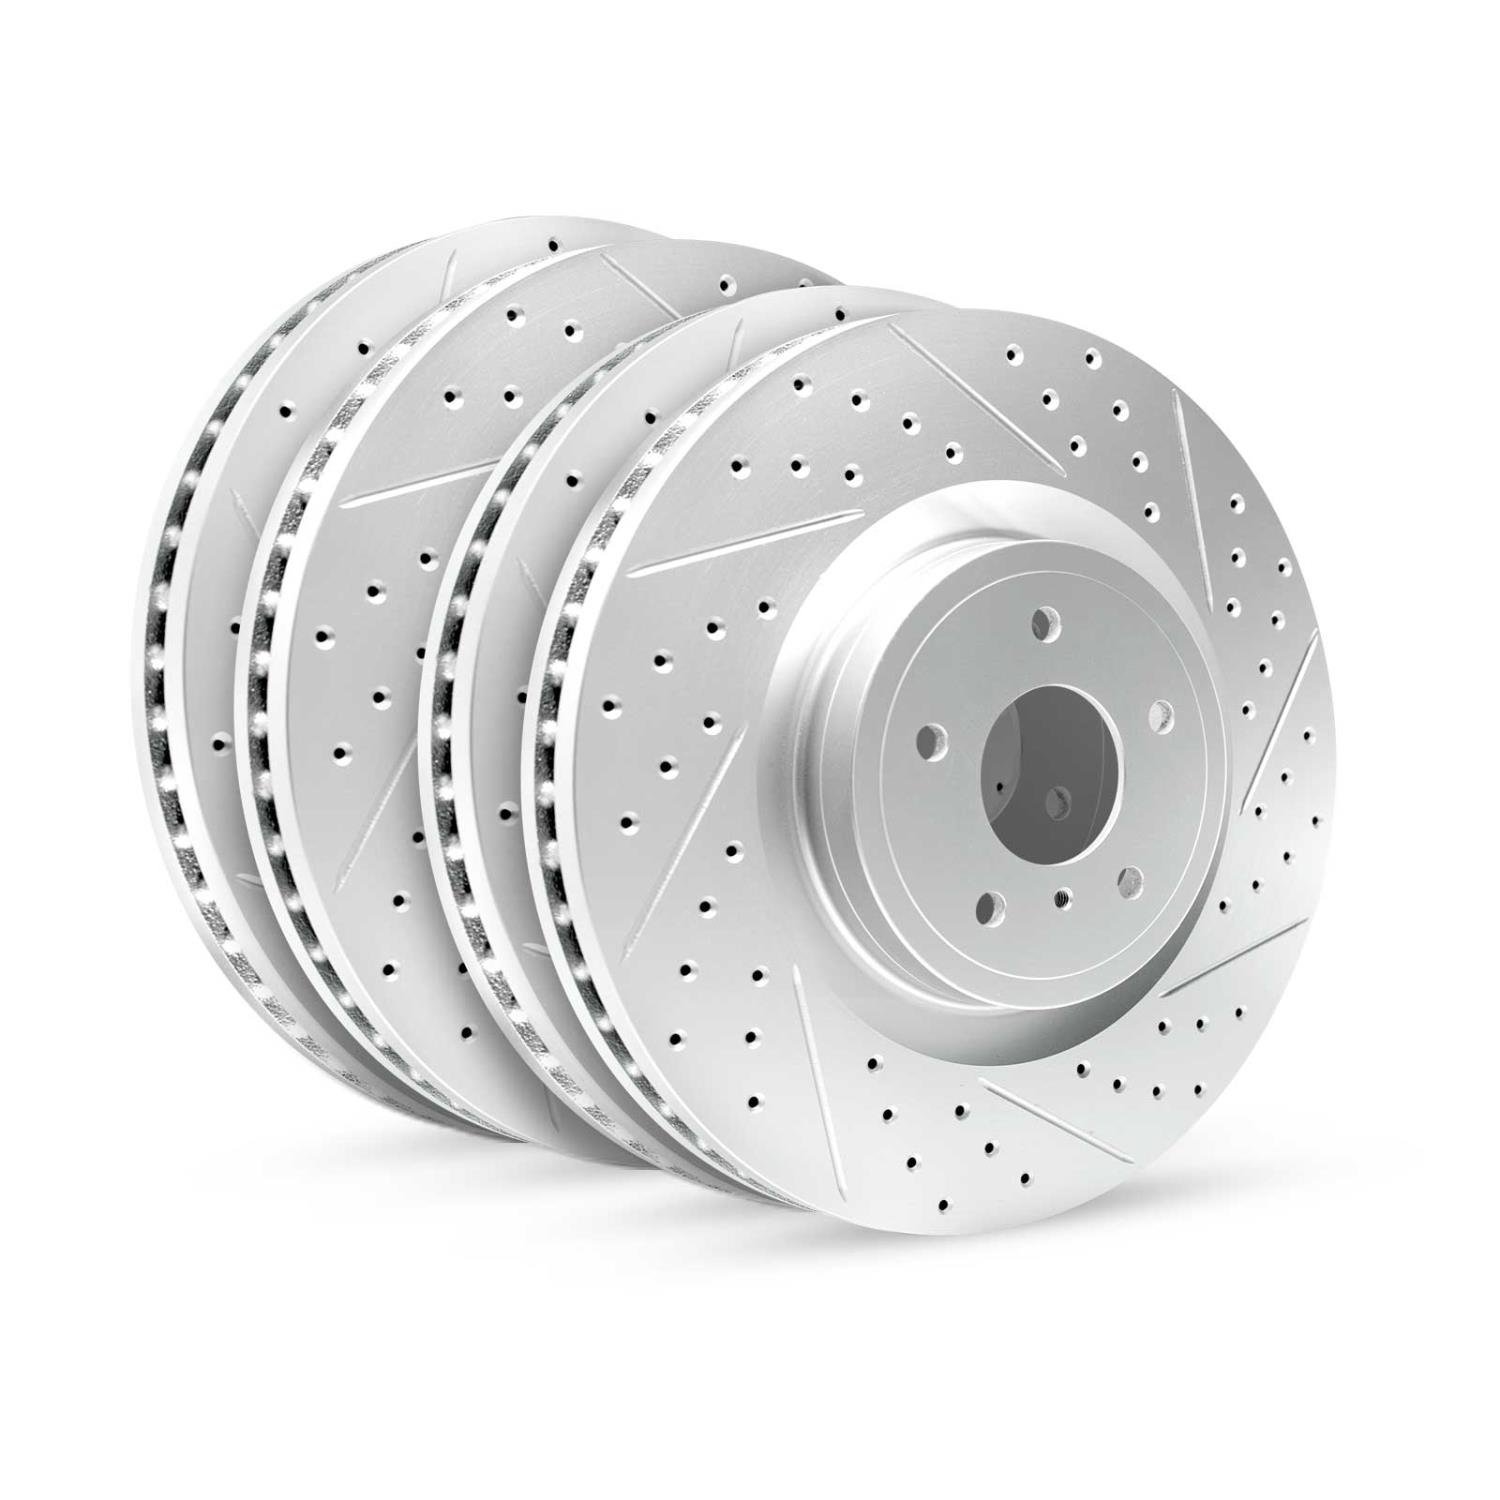 GEO-Carbon Drilled/Slotted Rotors, Fits Select Jaguar, Position: